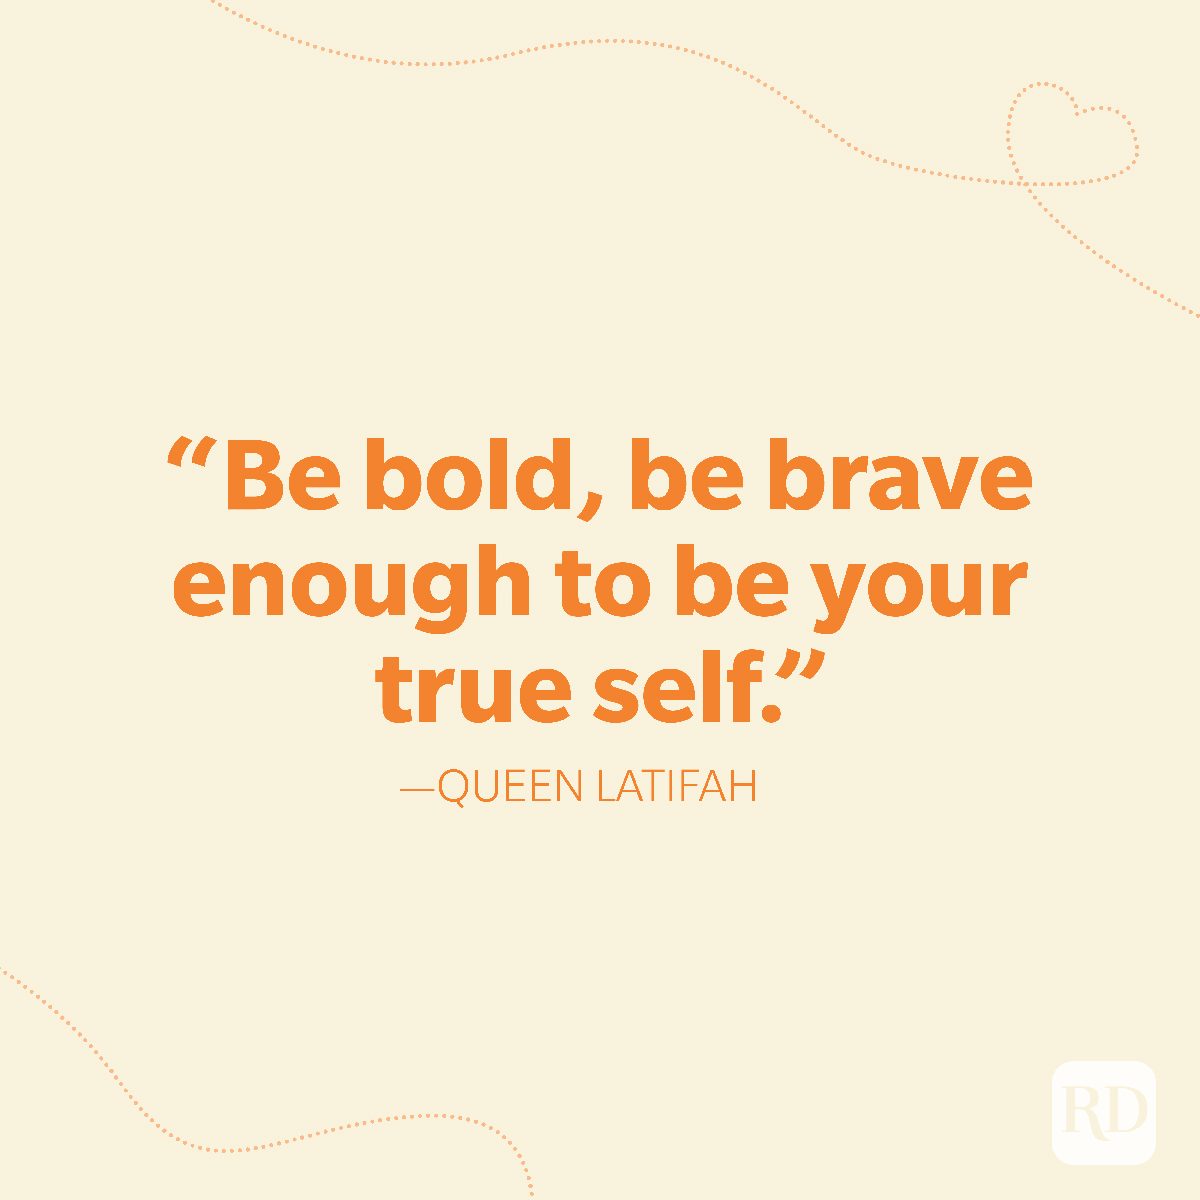 37-Be bold, be brave enough to be your true self